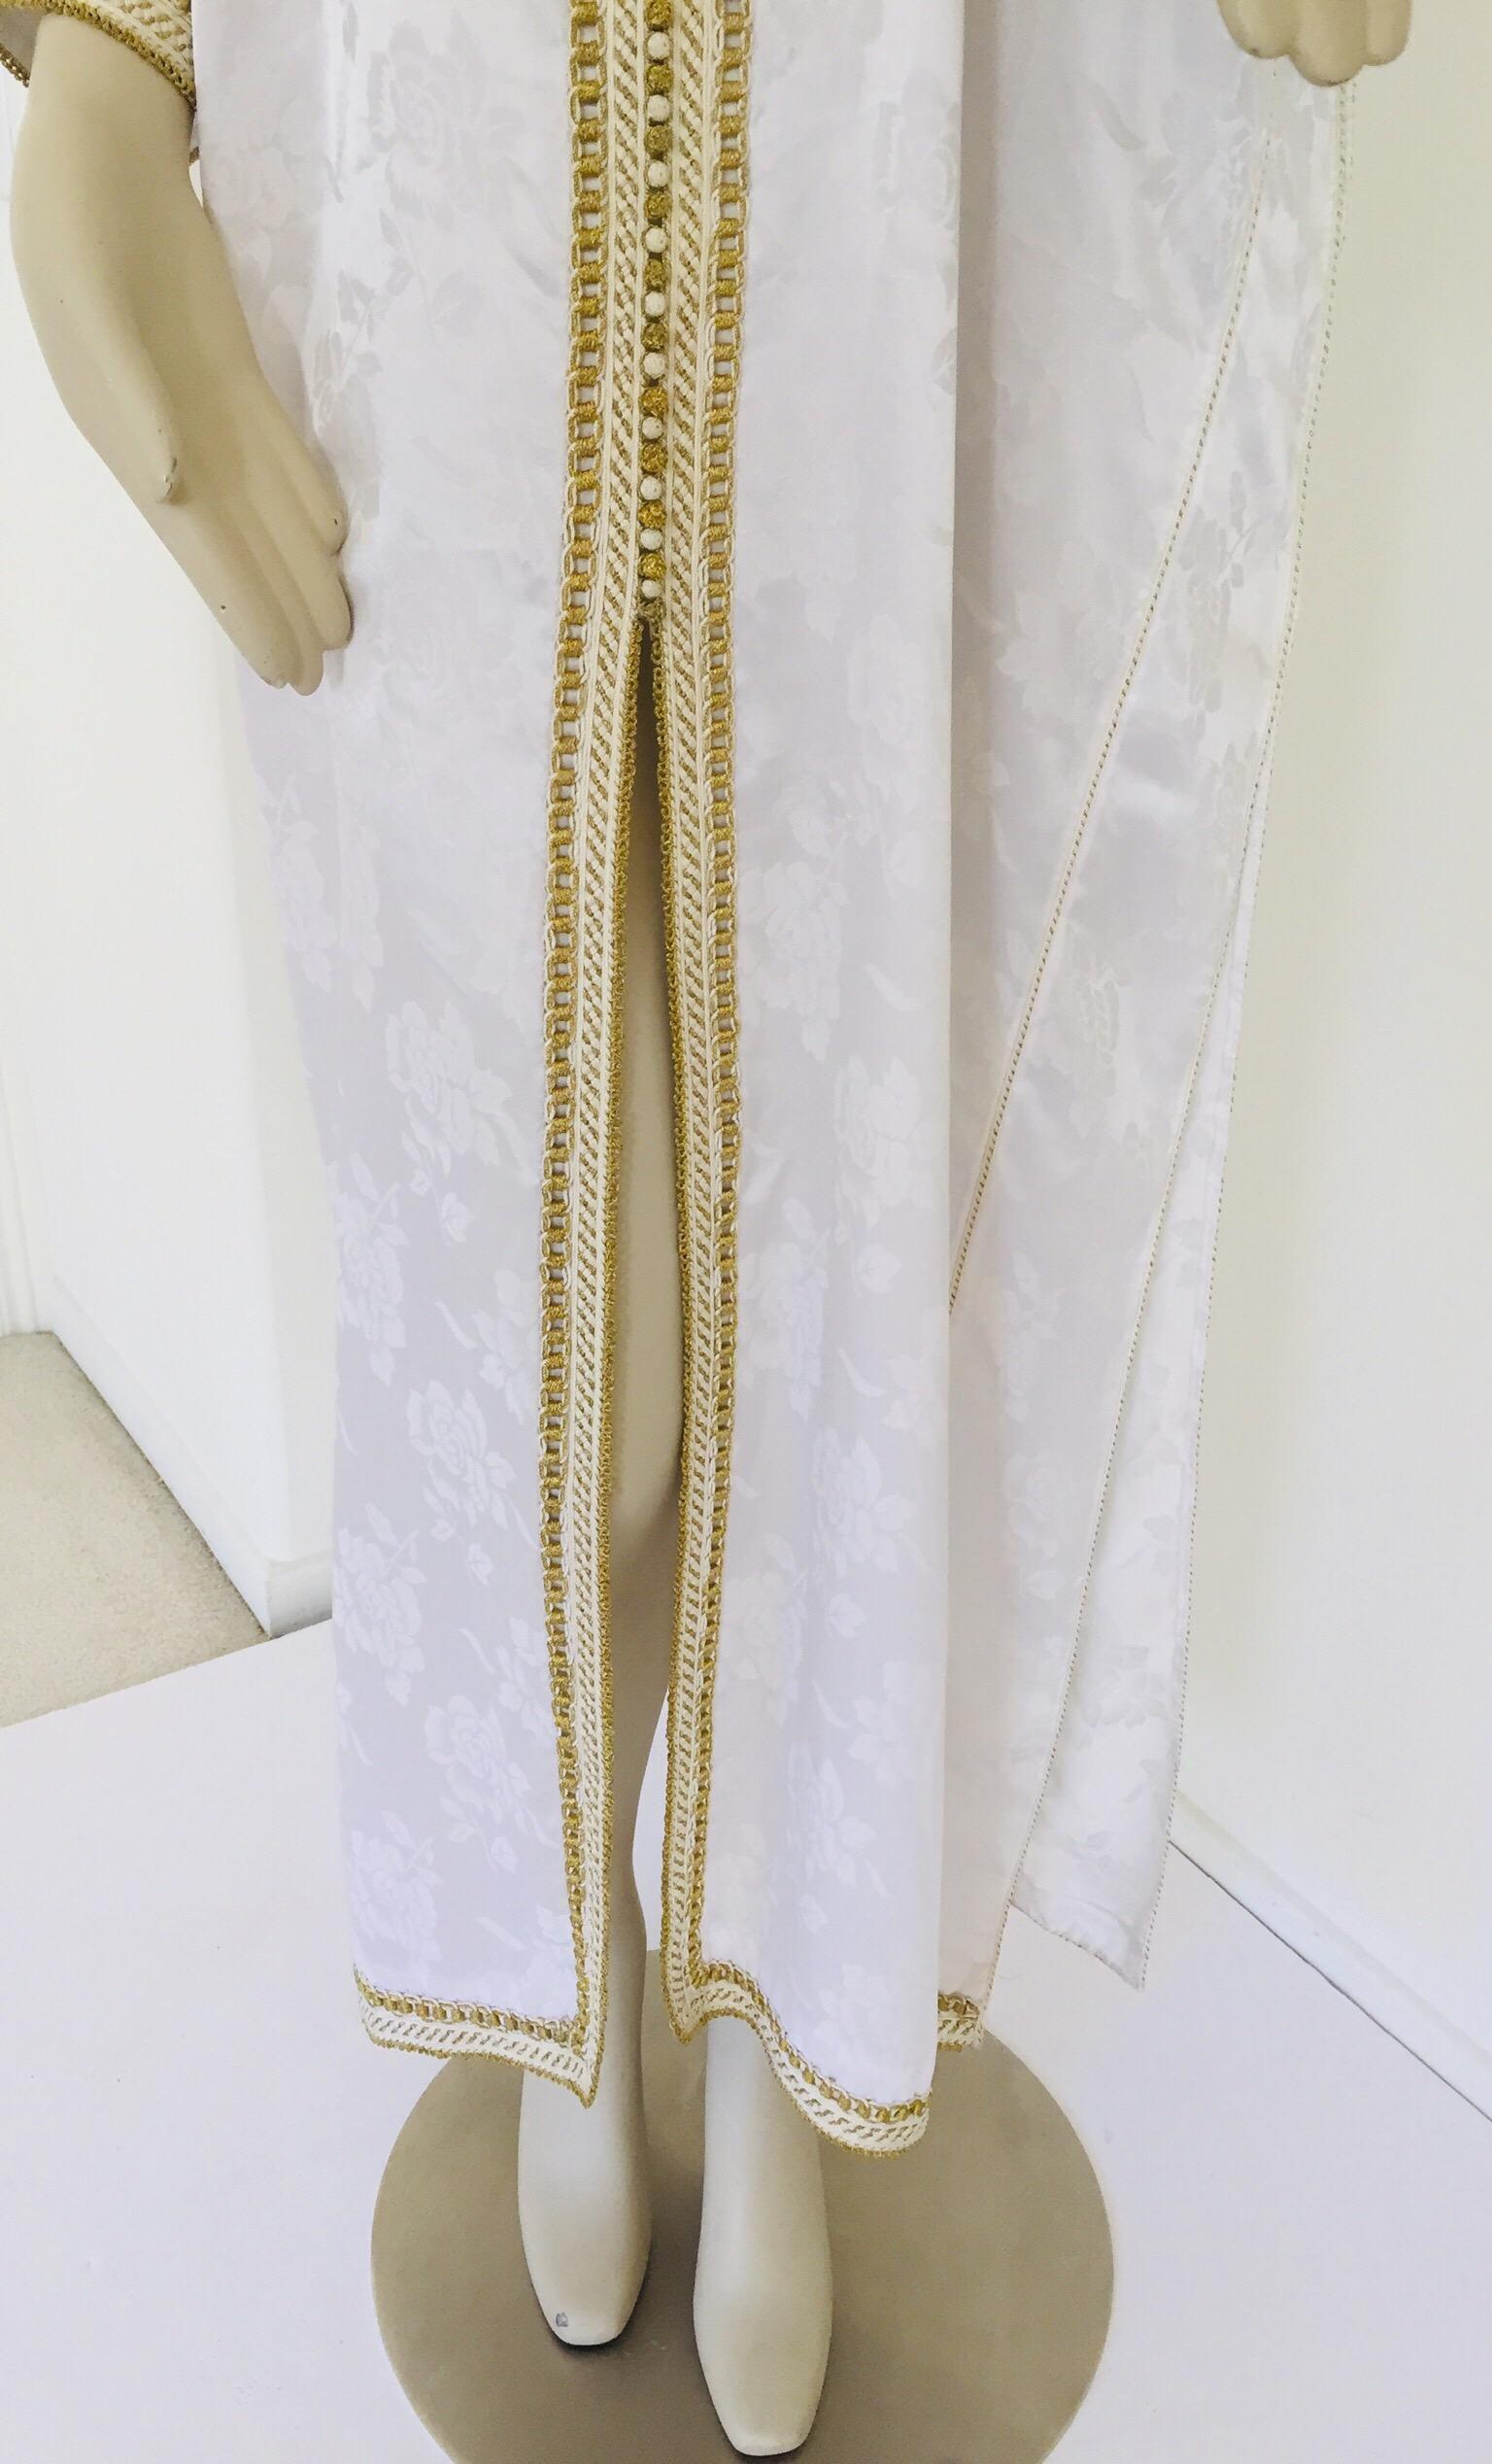 Moroccan White Kaftan Maxi Dress Caftan Size Large In Good Condition For Sale In North Hollywood, CA